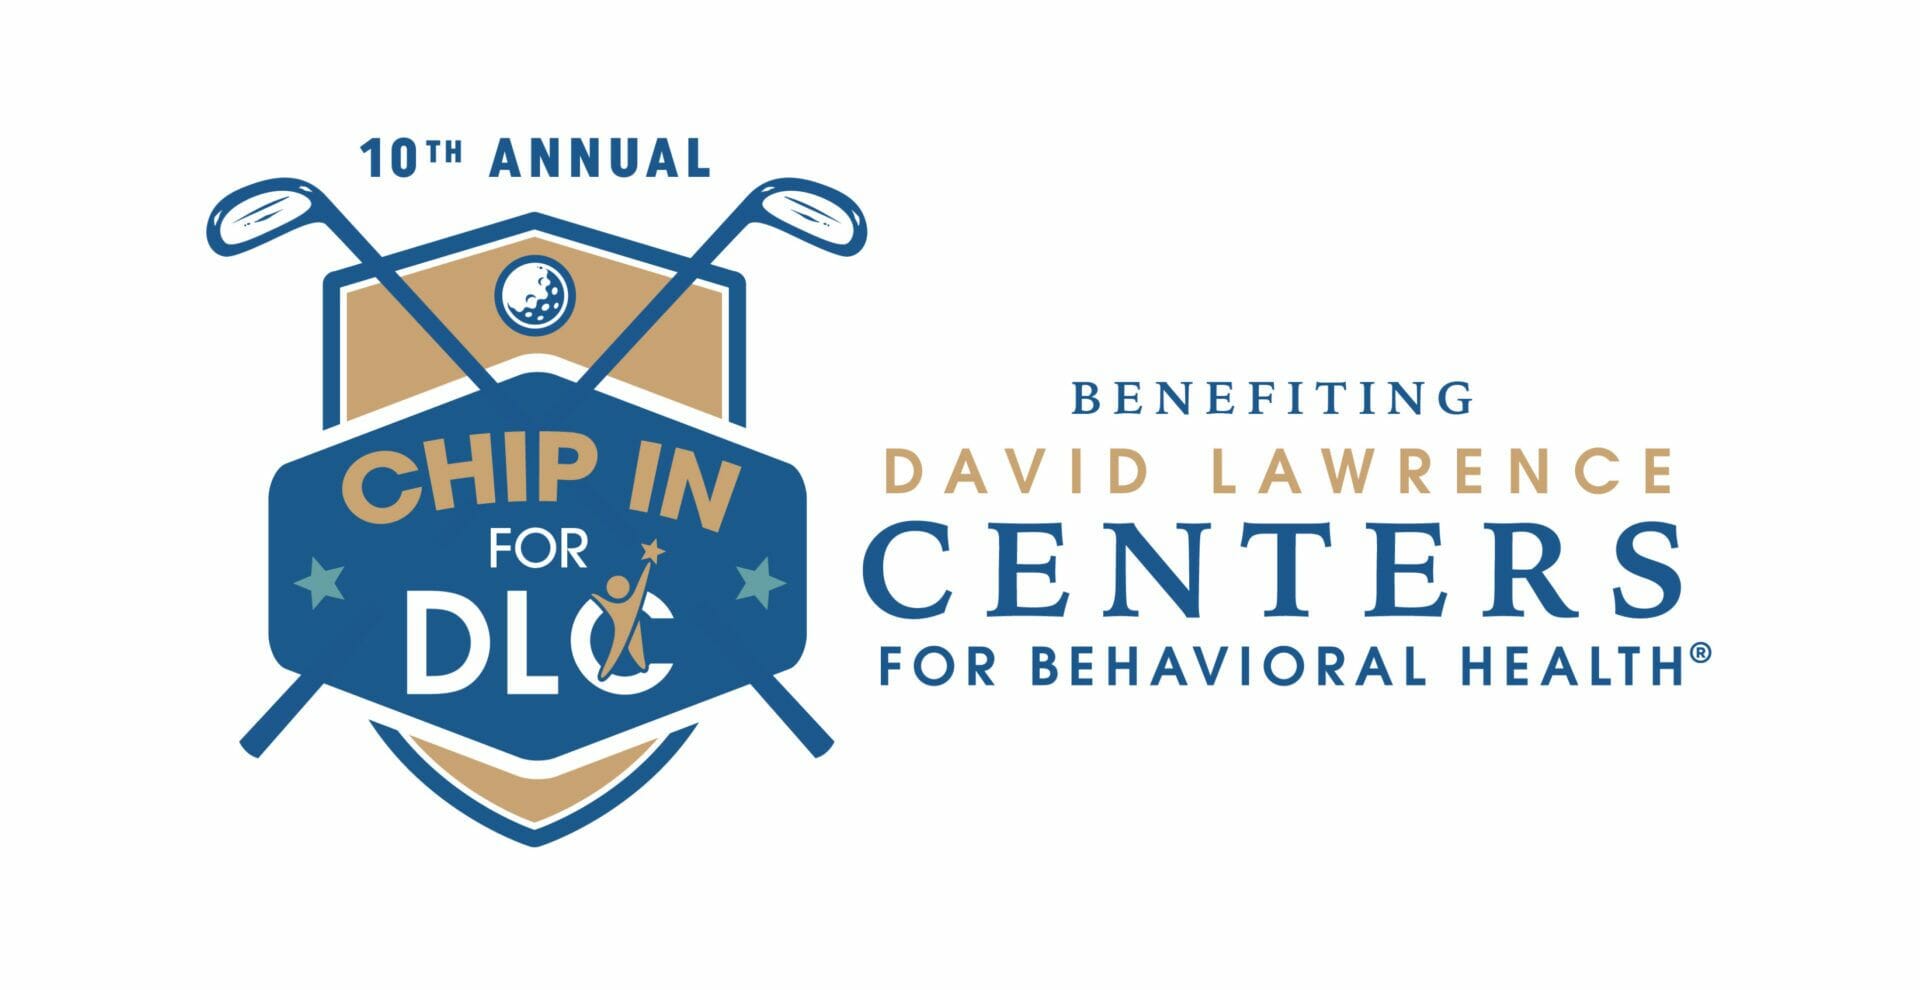 Blog image 10th Annual Chip in for DLC Golf Tournament